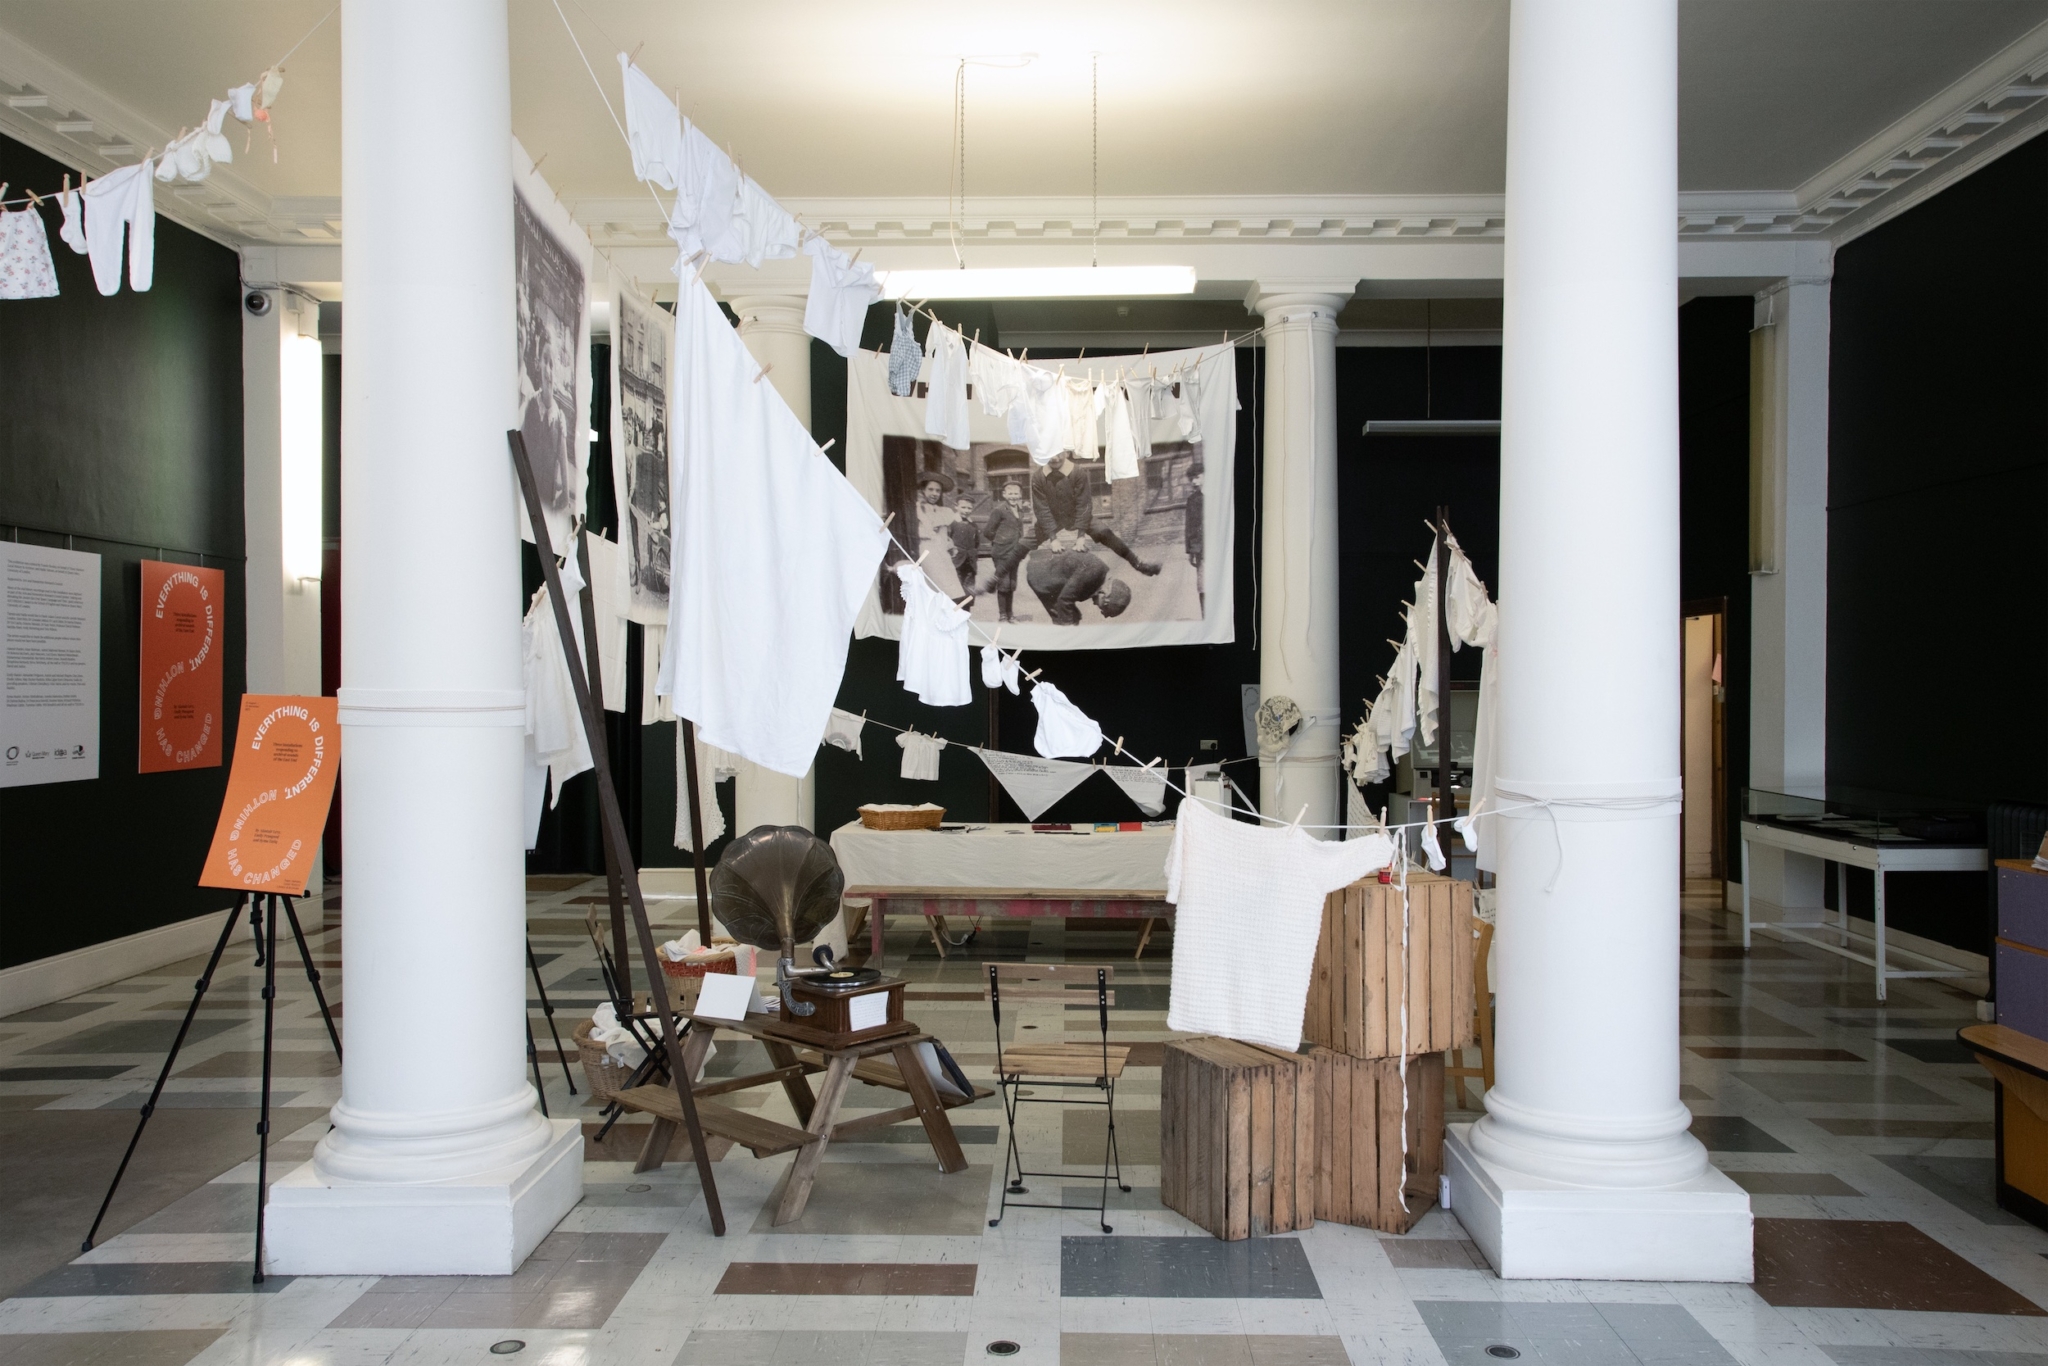 When We Were Young installed in Tower Hamlets Family History Library & Archives in Bethnal Green. The installation features lines of laundry hung across the four pillars in the centre of the room.